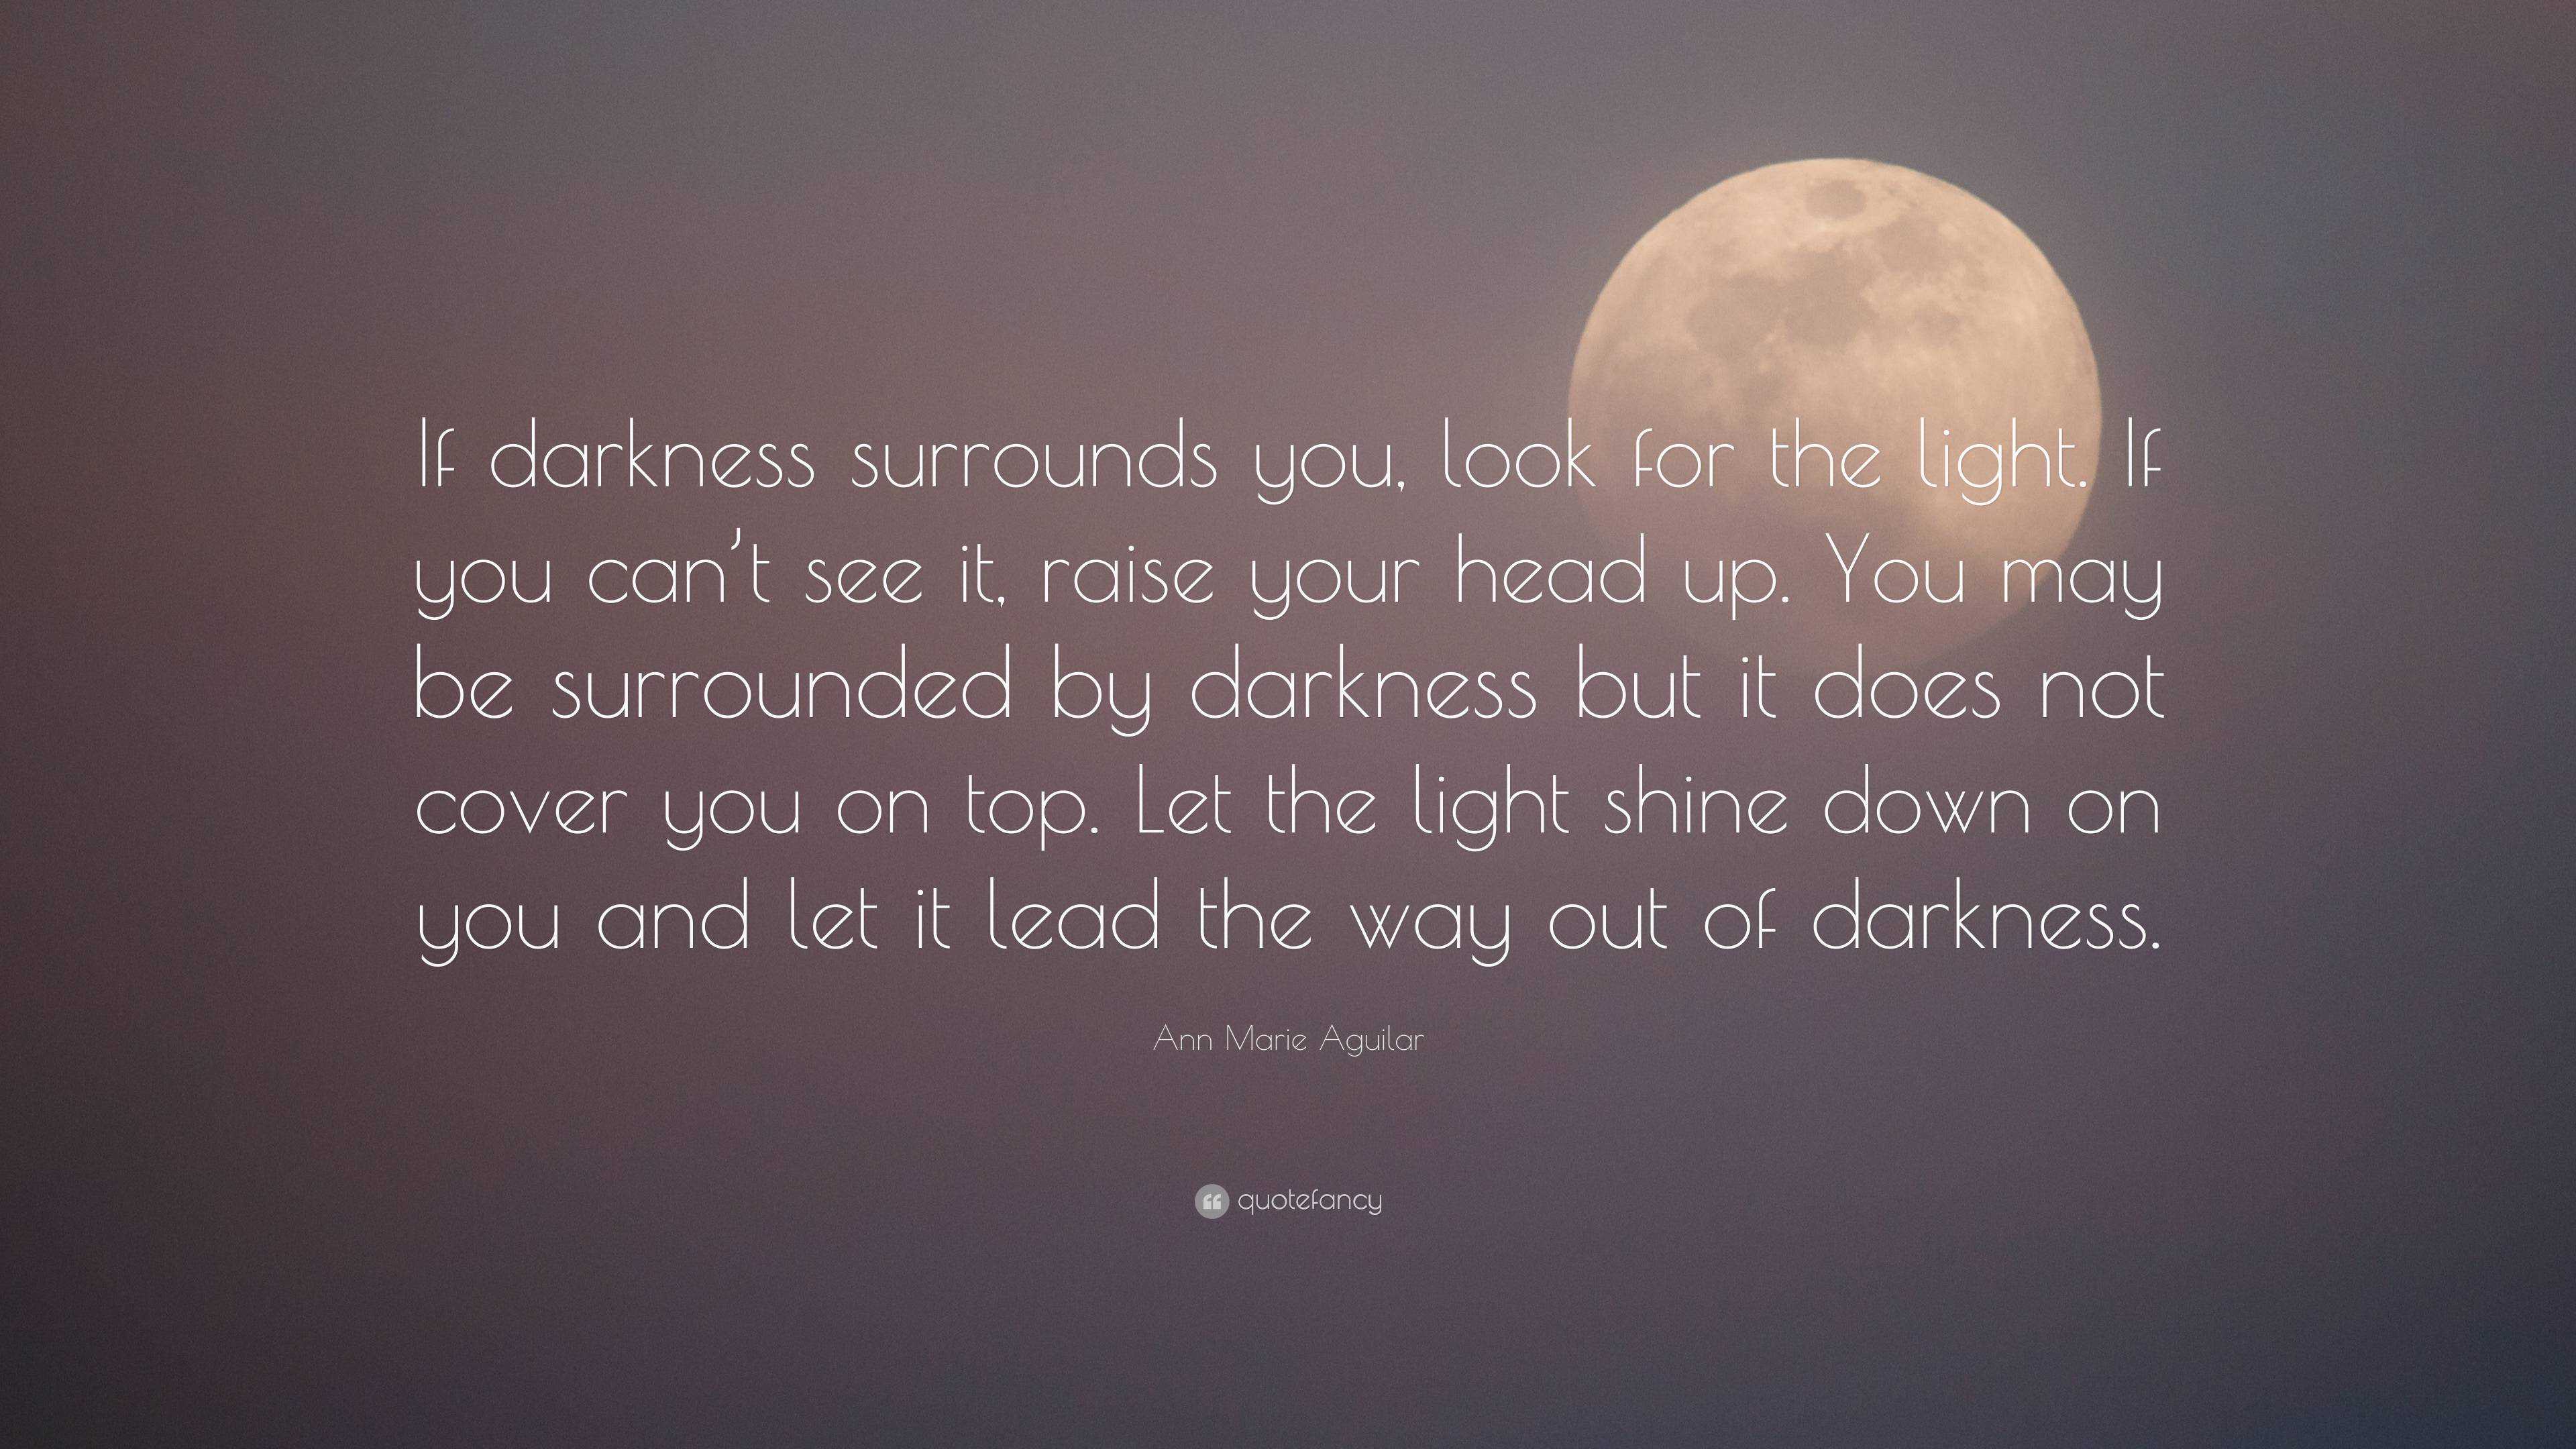 Ann Marie Aguilar Quote: “If darkness surrounds you, look for the light ...